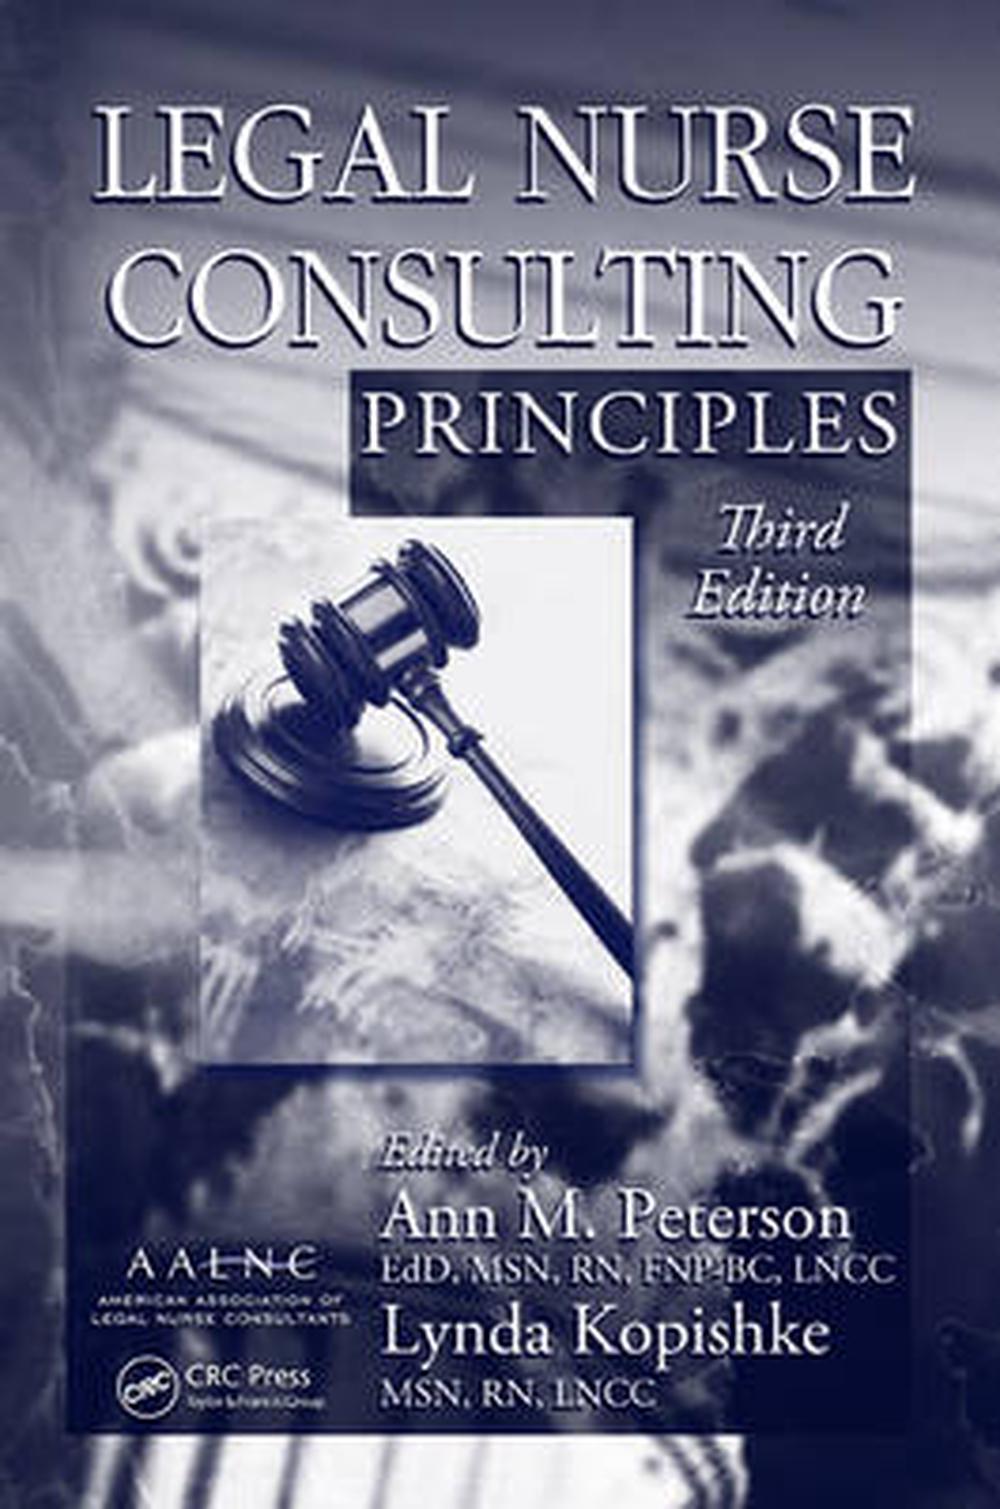 Legal Nurse Consulting Principles, Third Edition by Ann M. Peterson, Hardcover, 9781420089516